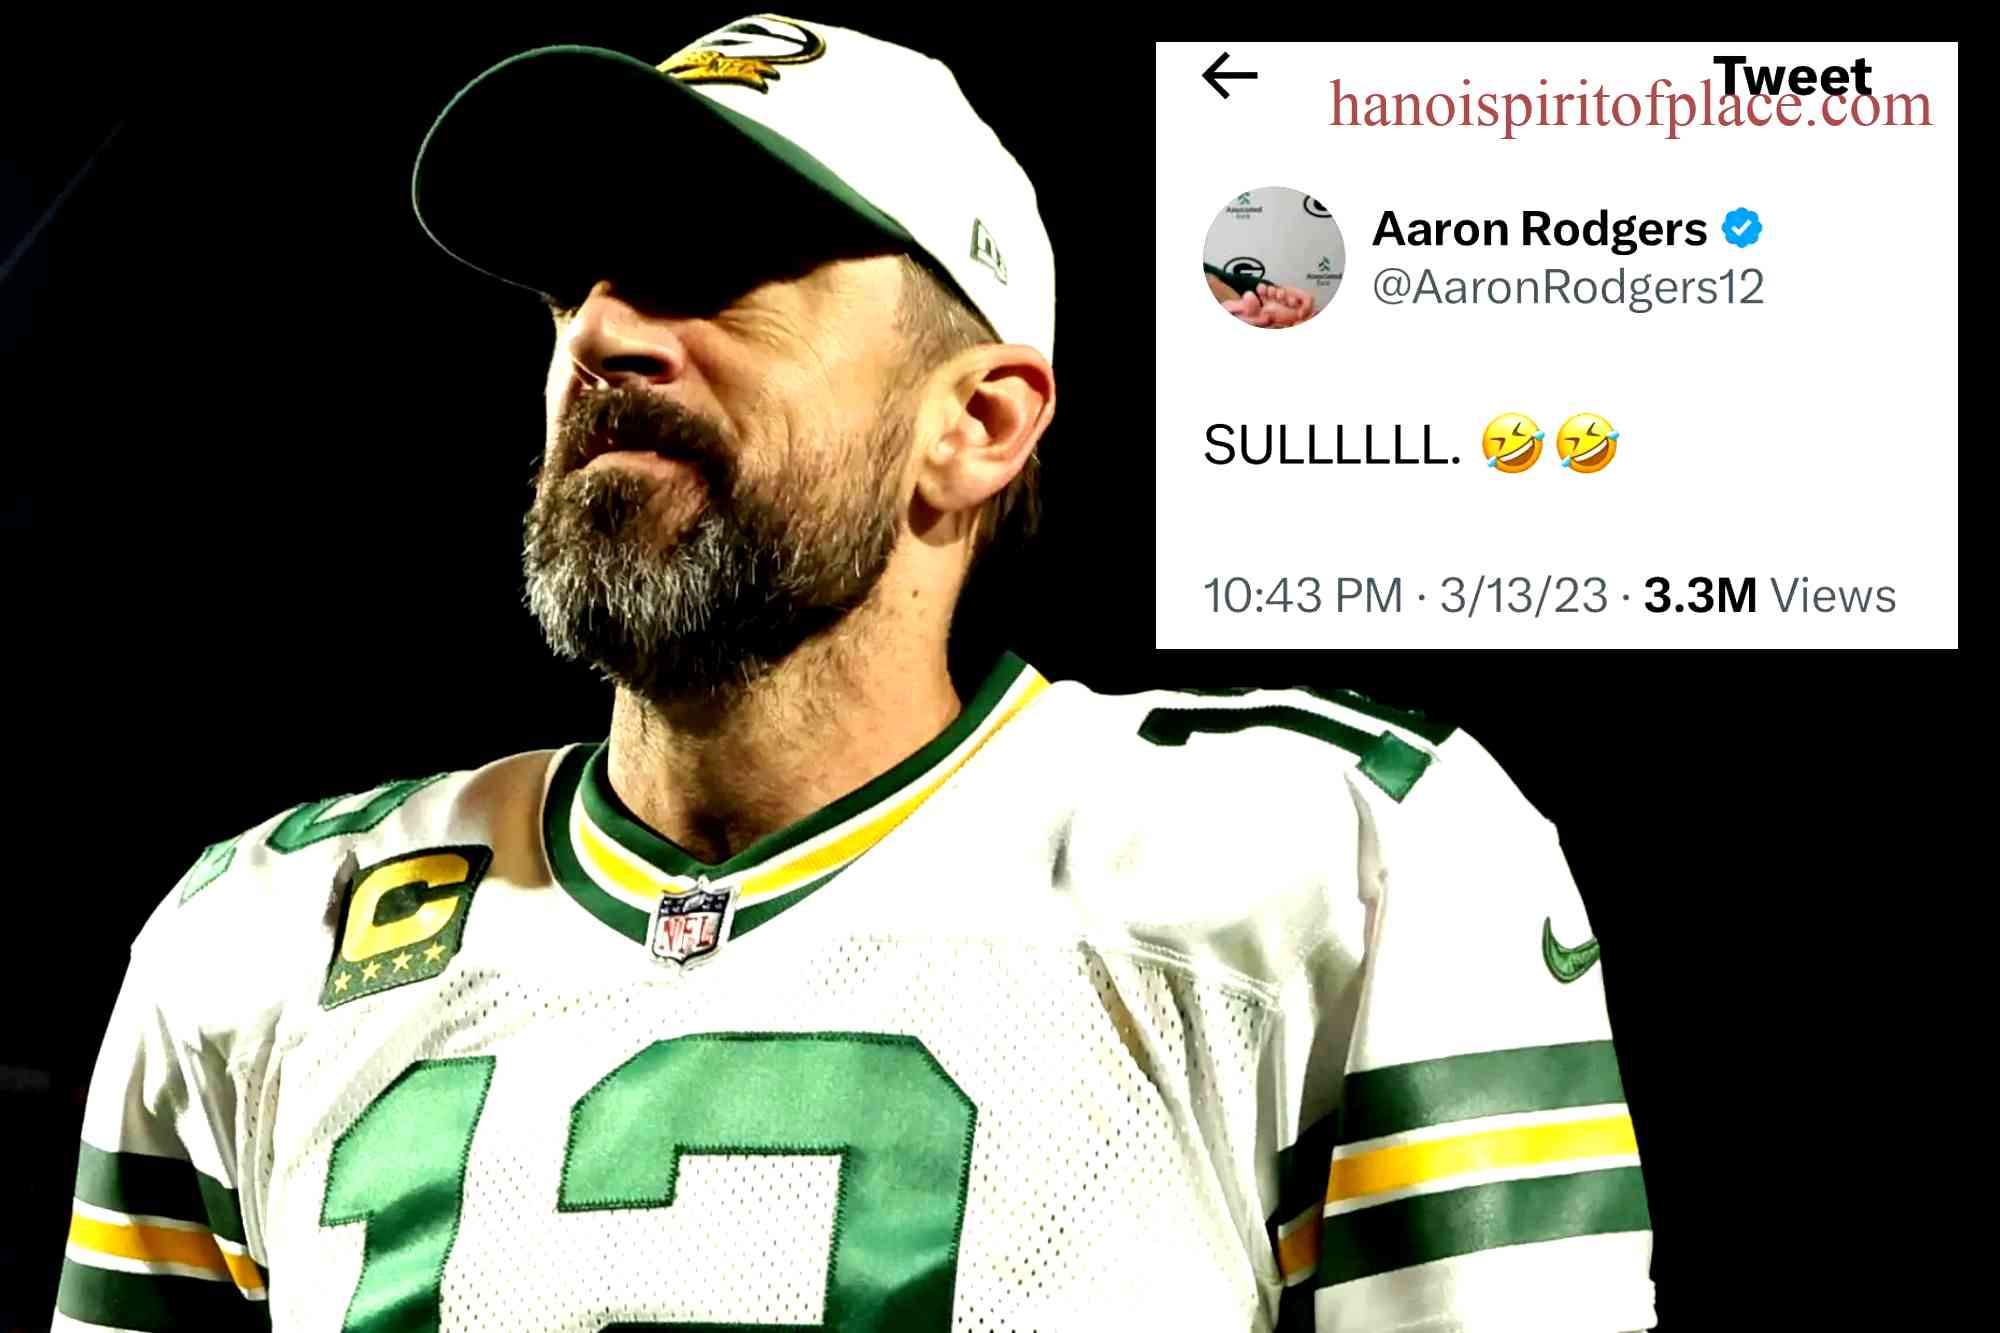 Overview of Aaron Rodgers' career